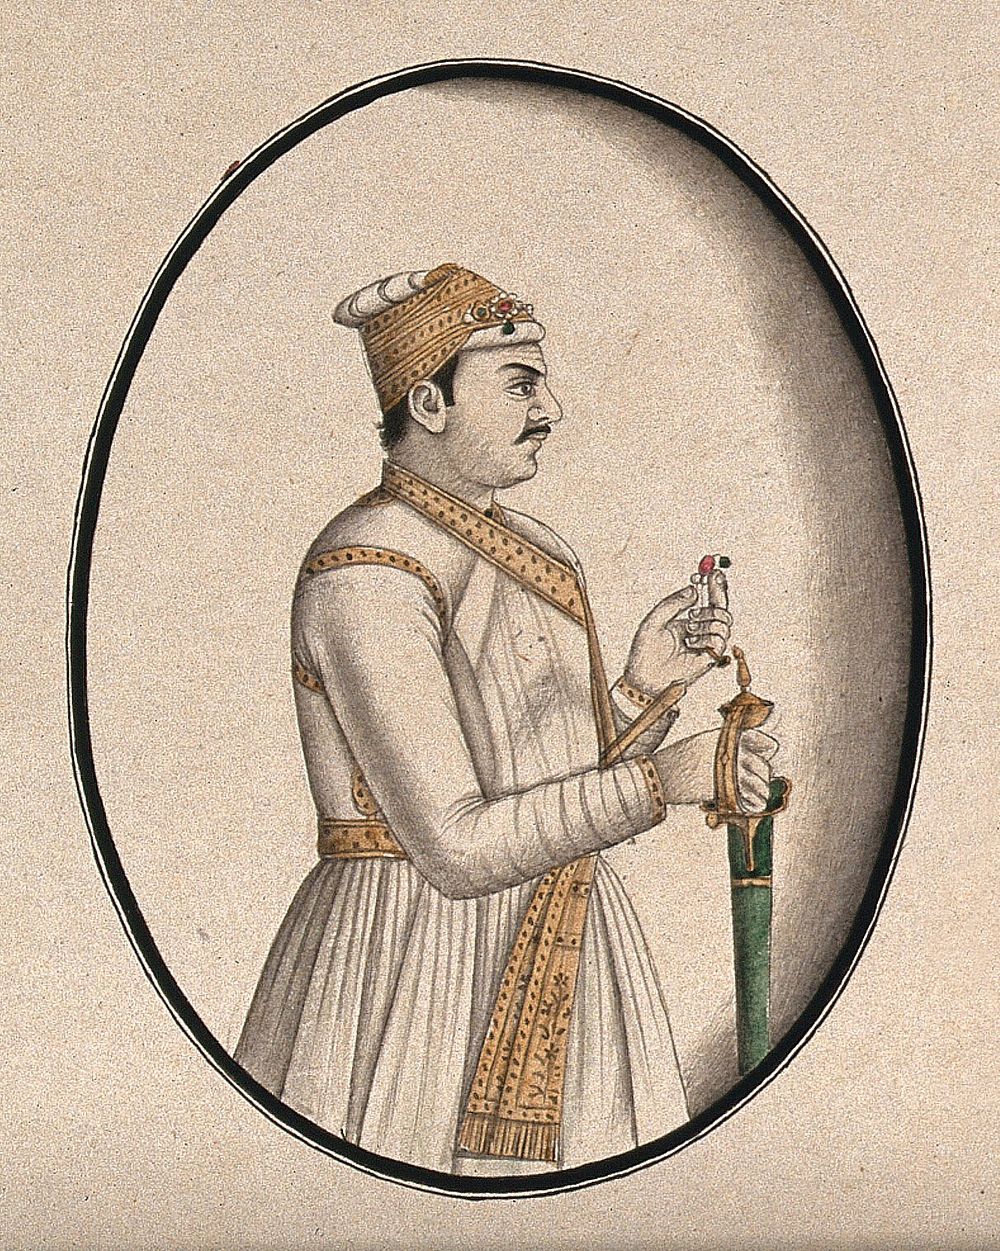 A Mughal courtier holding a green sword and a flower . Watercolour drawing by an Indian artist.